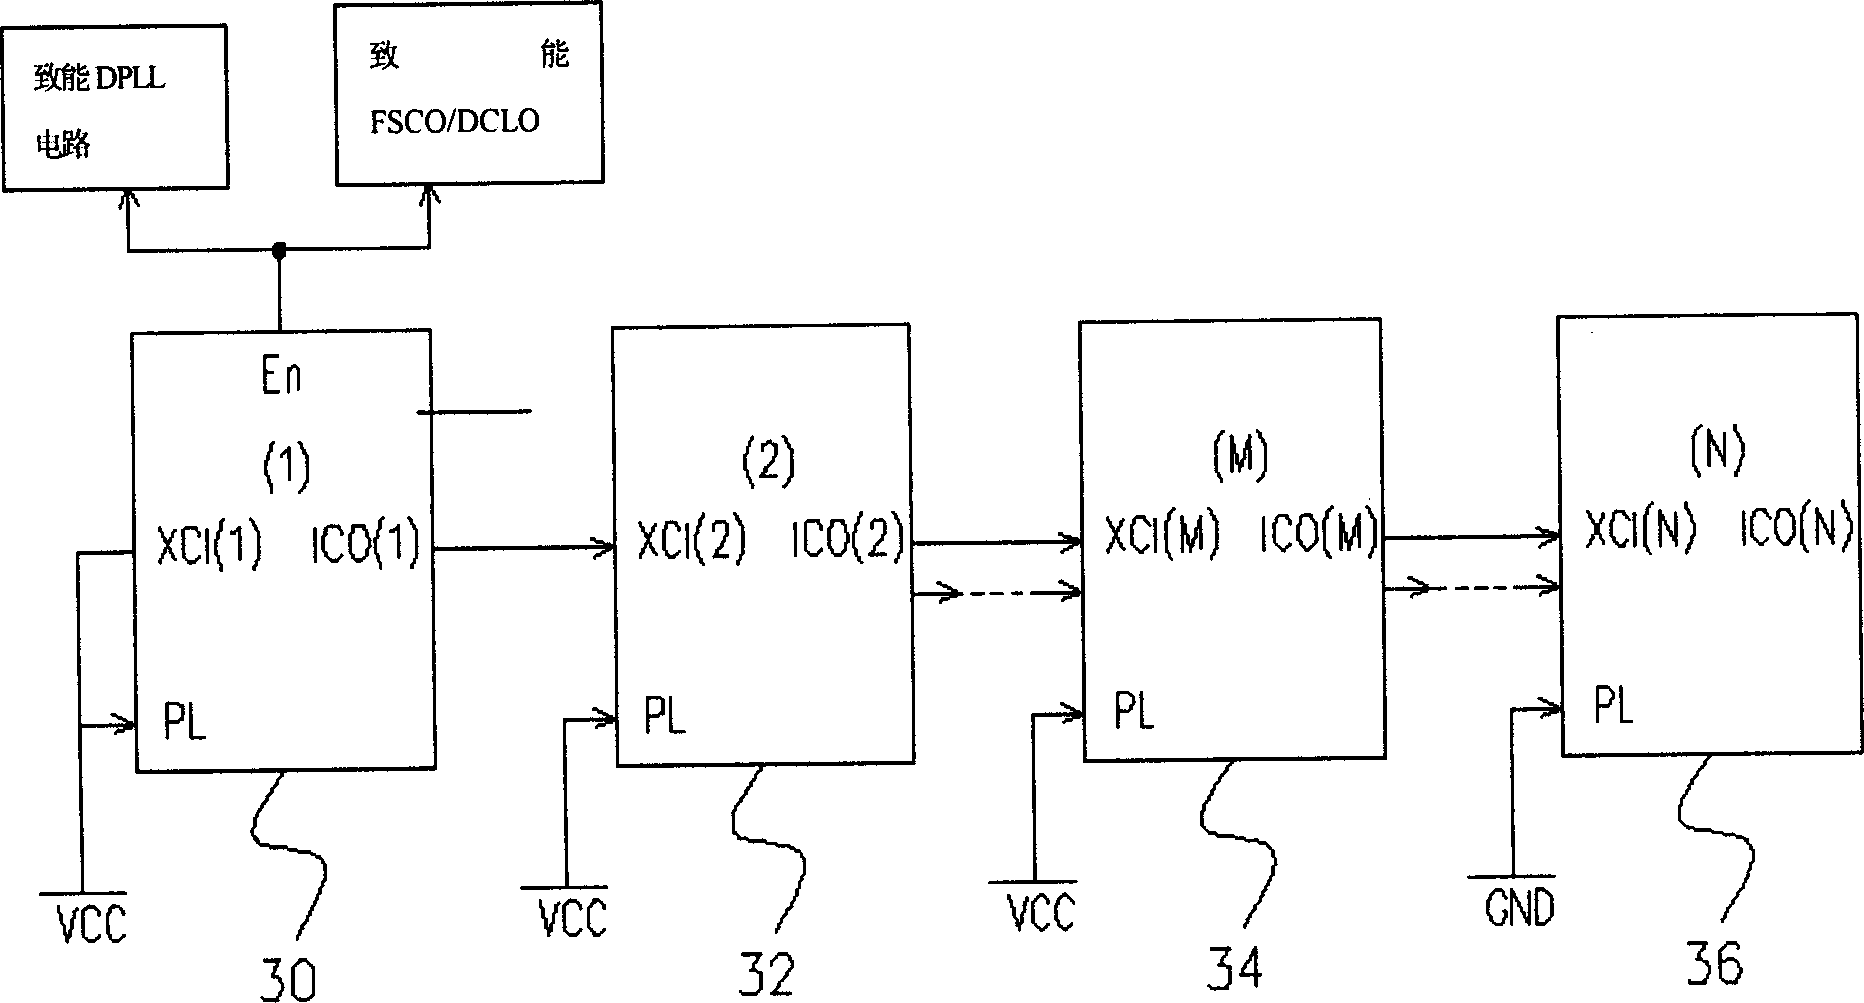 Special small ISON exchange selecting synchronous pulse source automatically